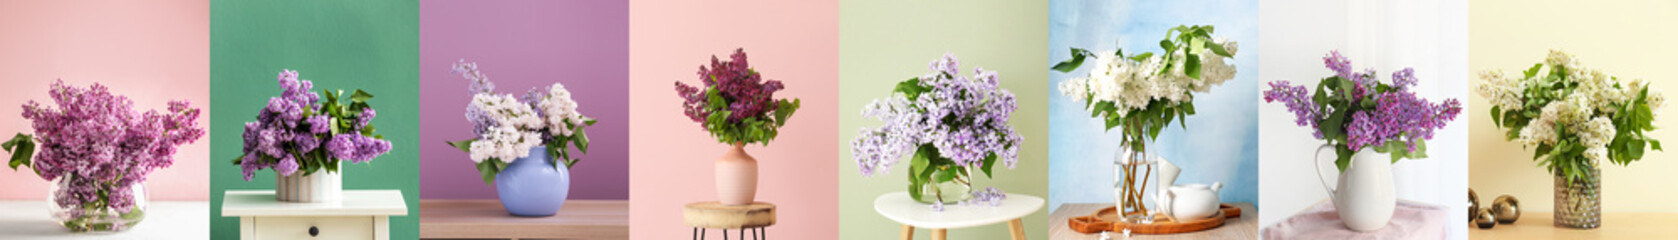 Collage with bouquets of beautiful lilac flowers on colorful background